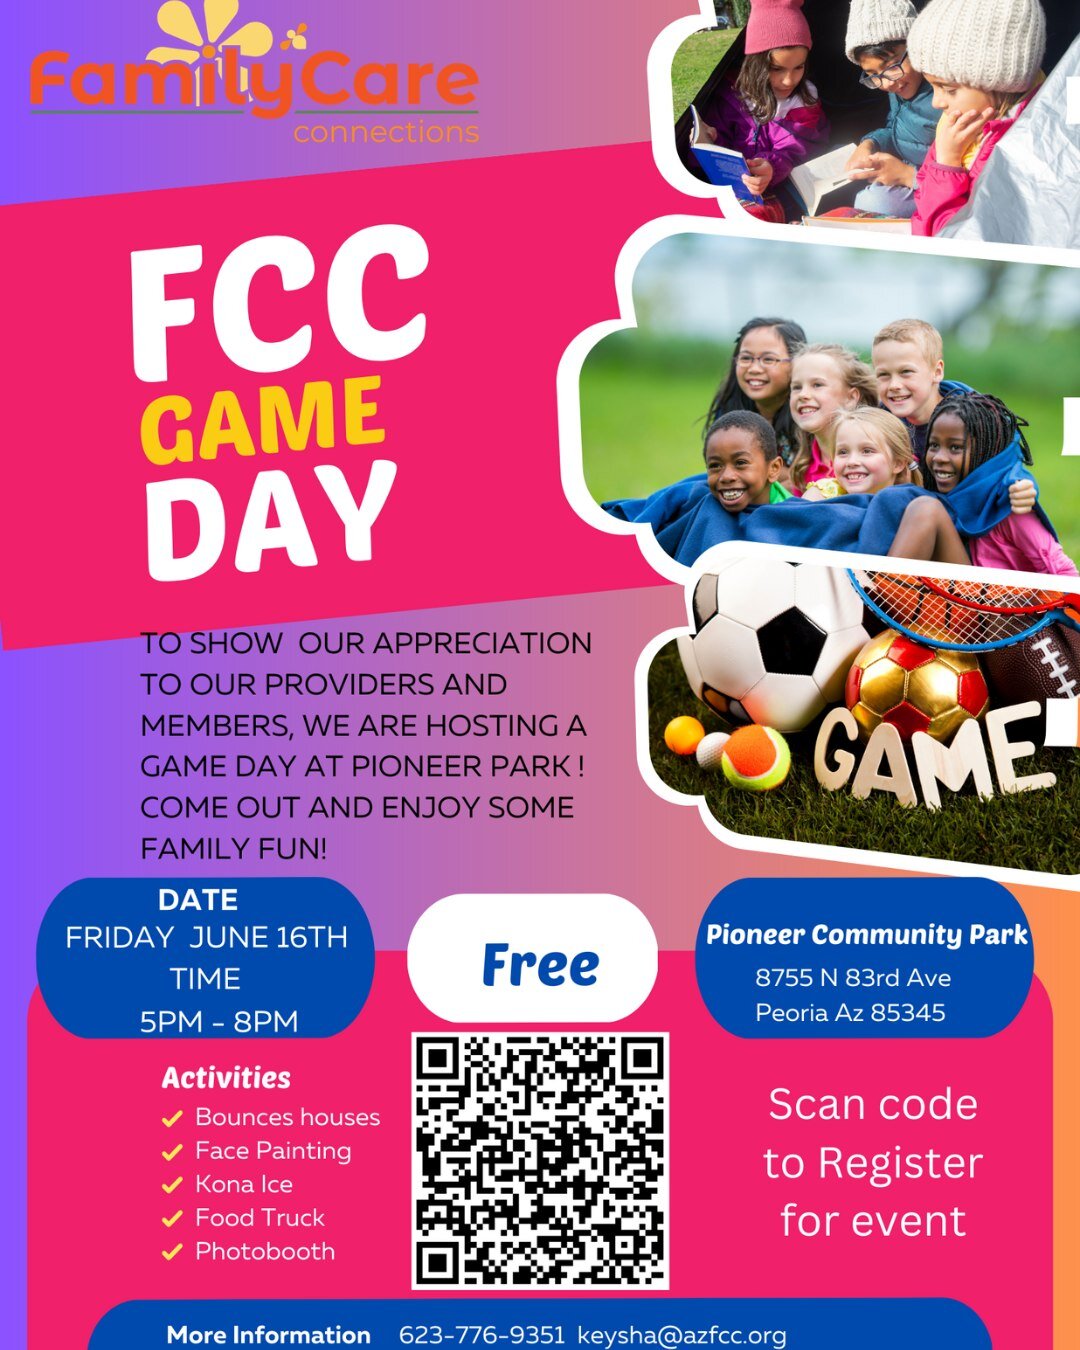 We can't wait to hang with all of our amazing providers and members! Join us for a family fun day at the park!

Scan the QR code to register or call 623-776-9352 or email keysha@azfcc.org for more information.

#azfamilyfun #familycareconnections #sp